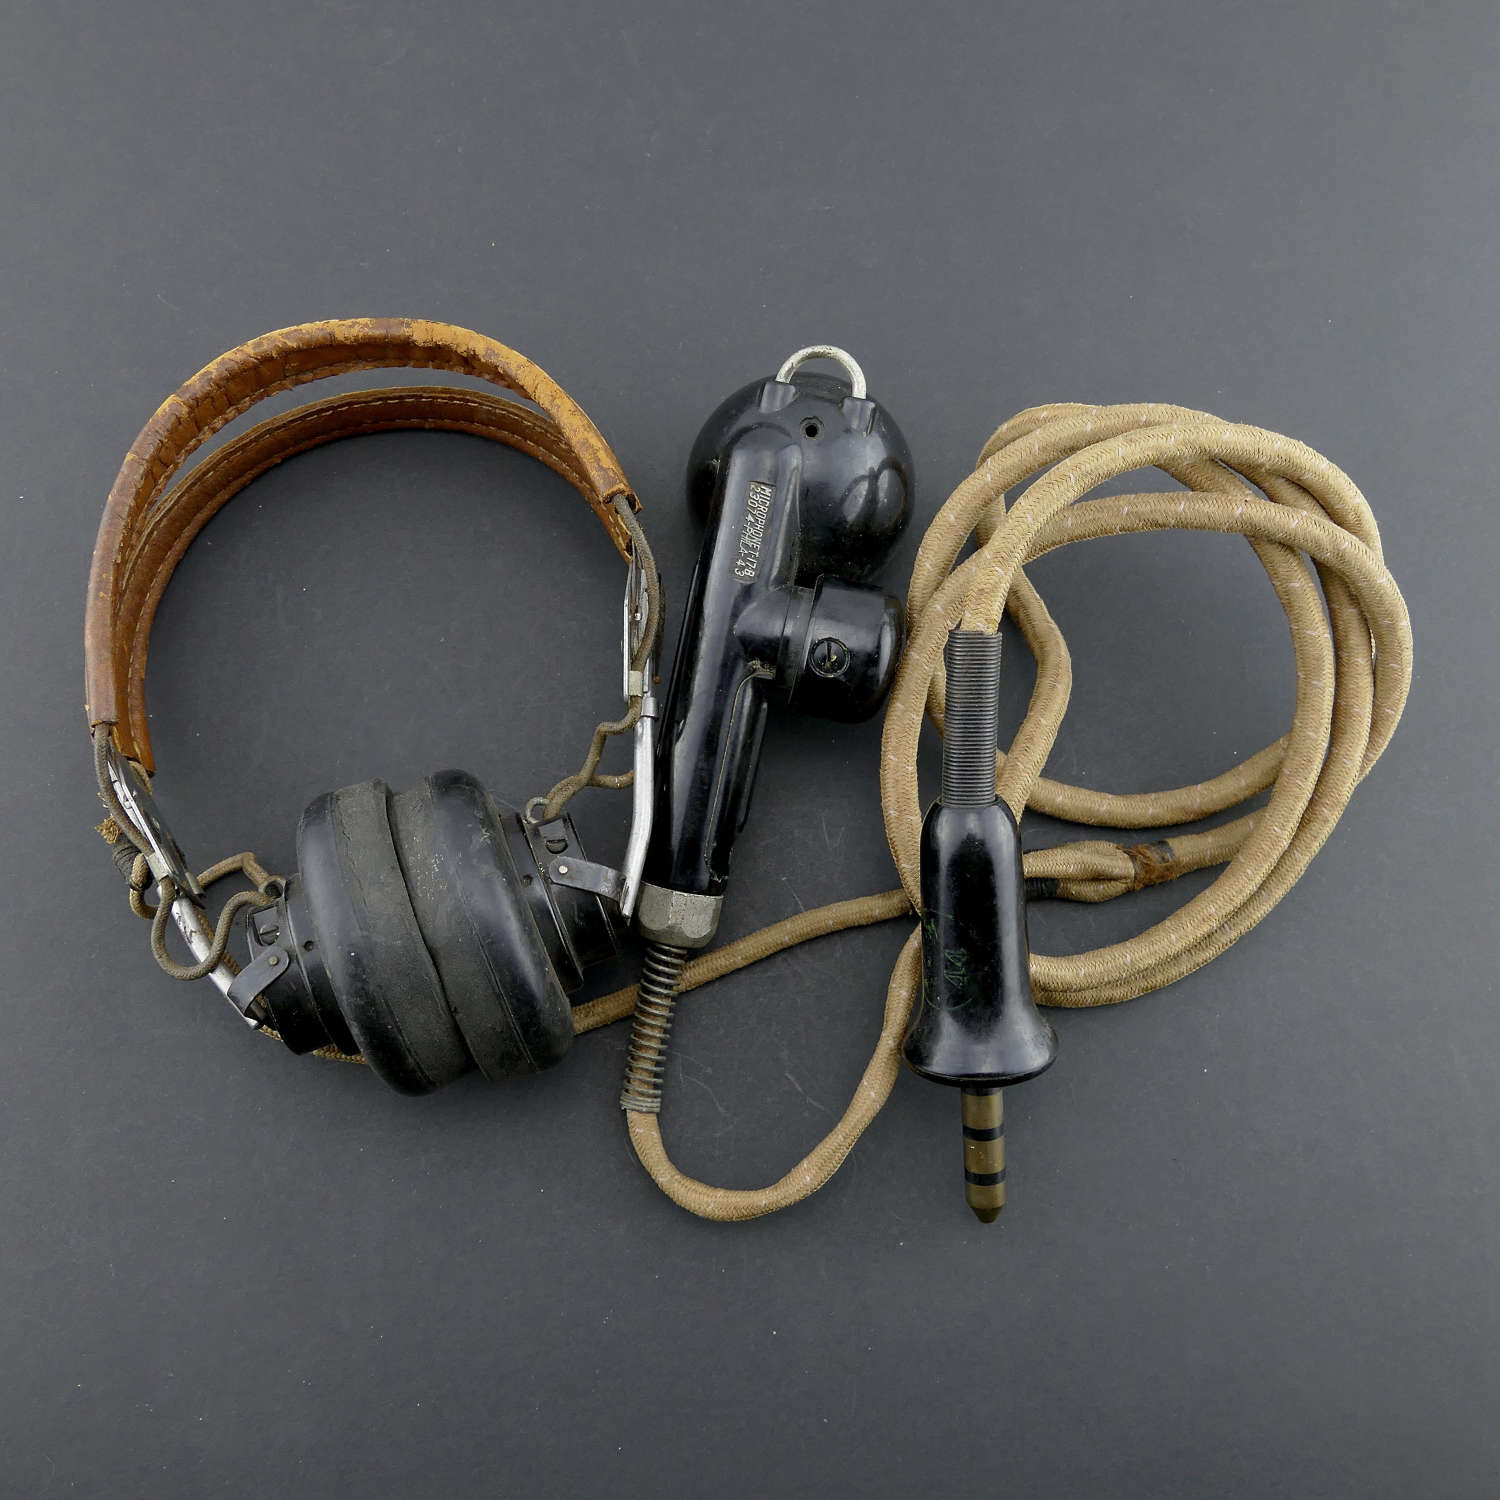 USAAF / RAF 'used' HS-33 headset with T-17 microphone